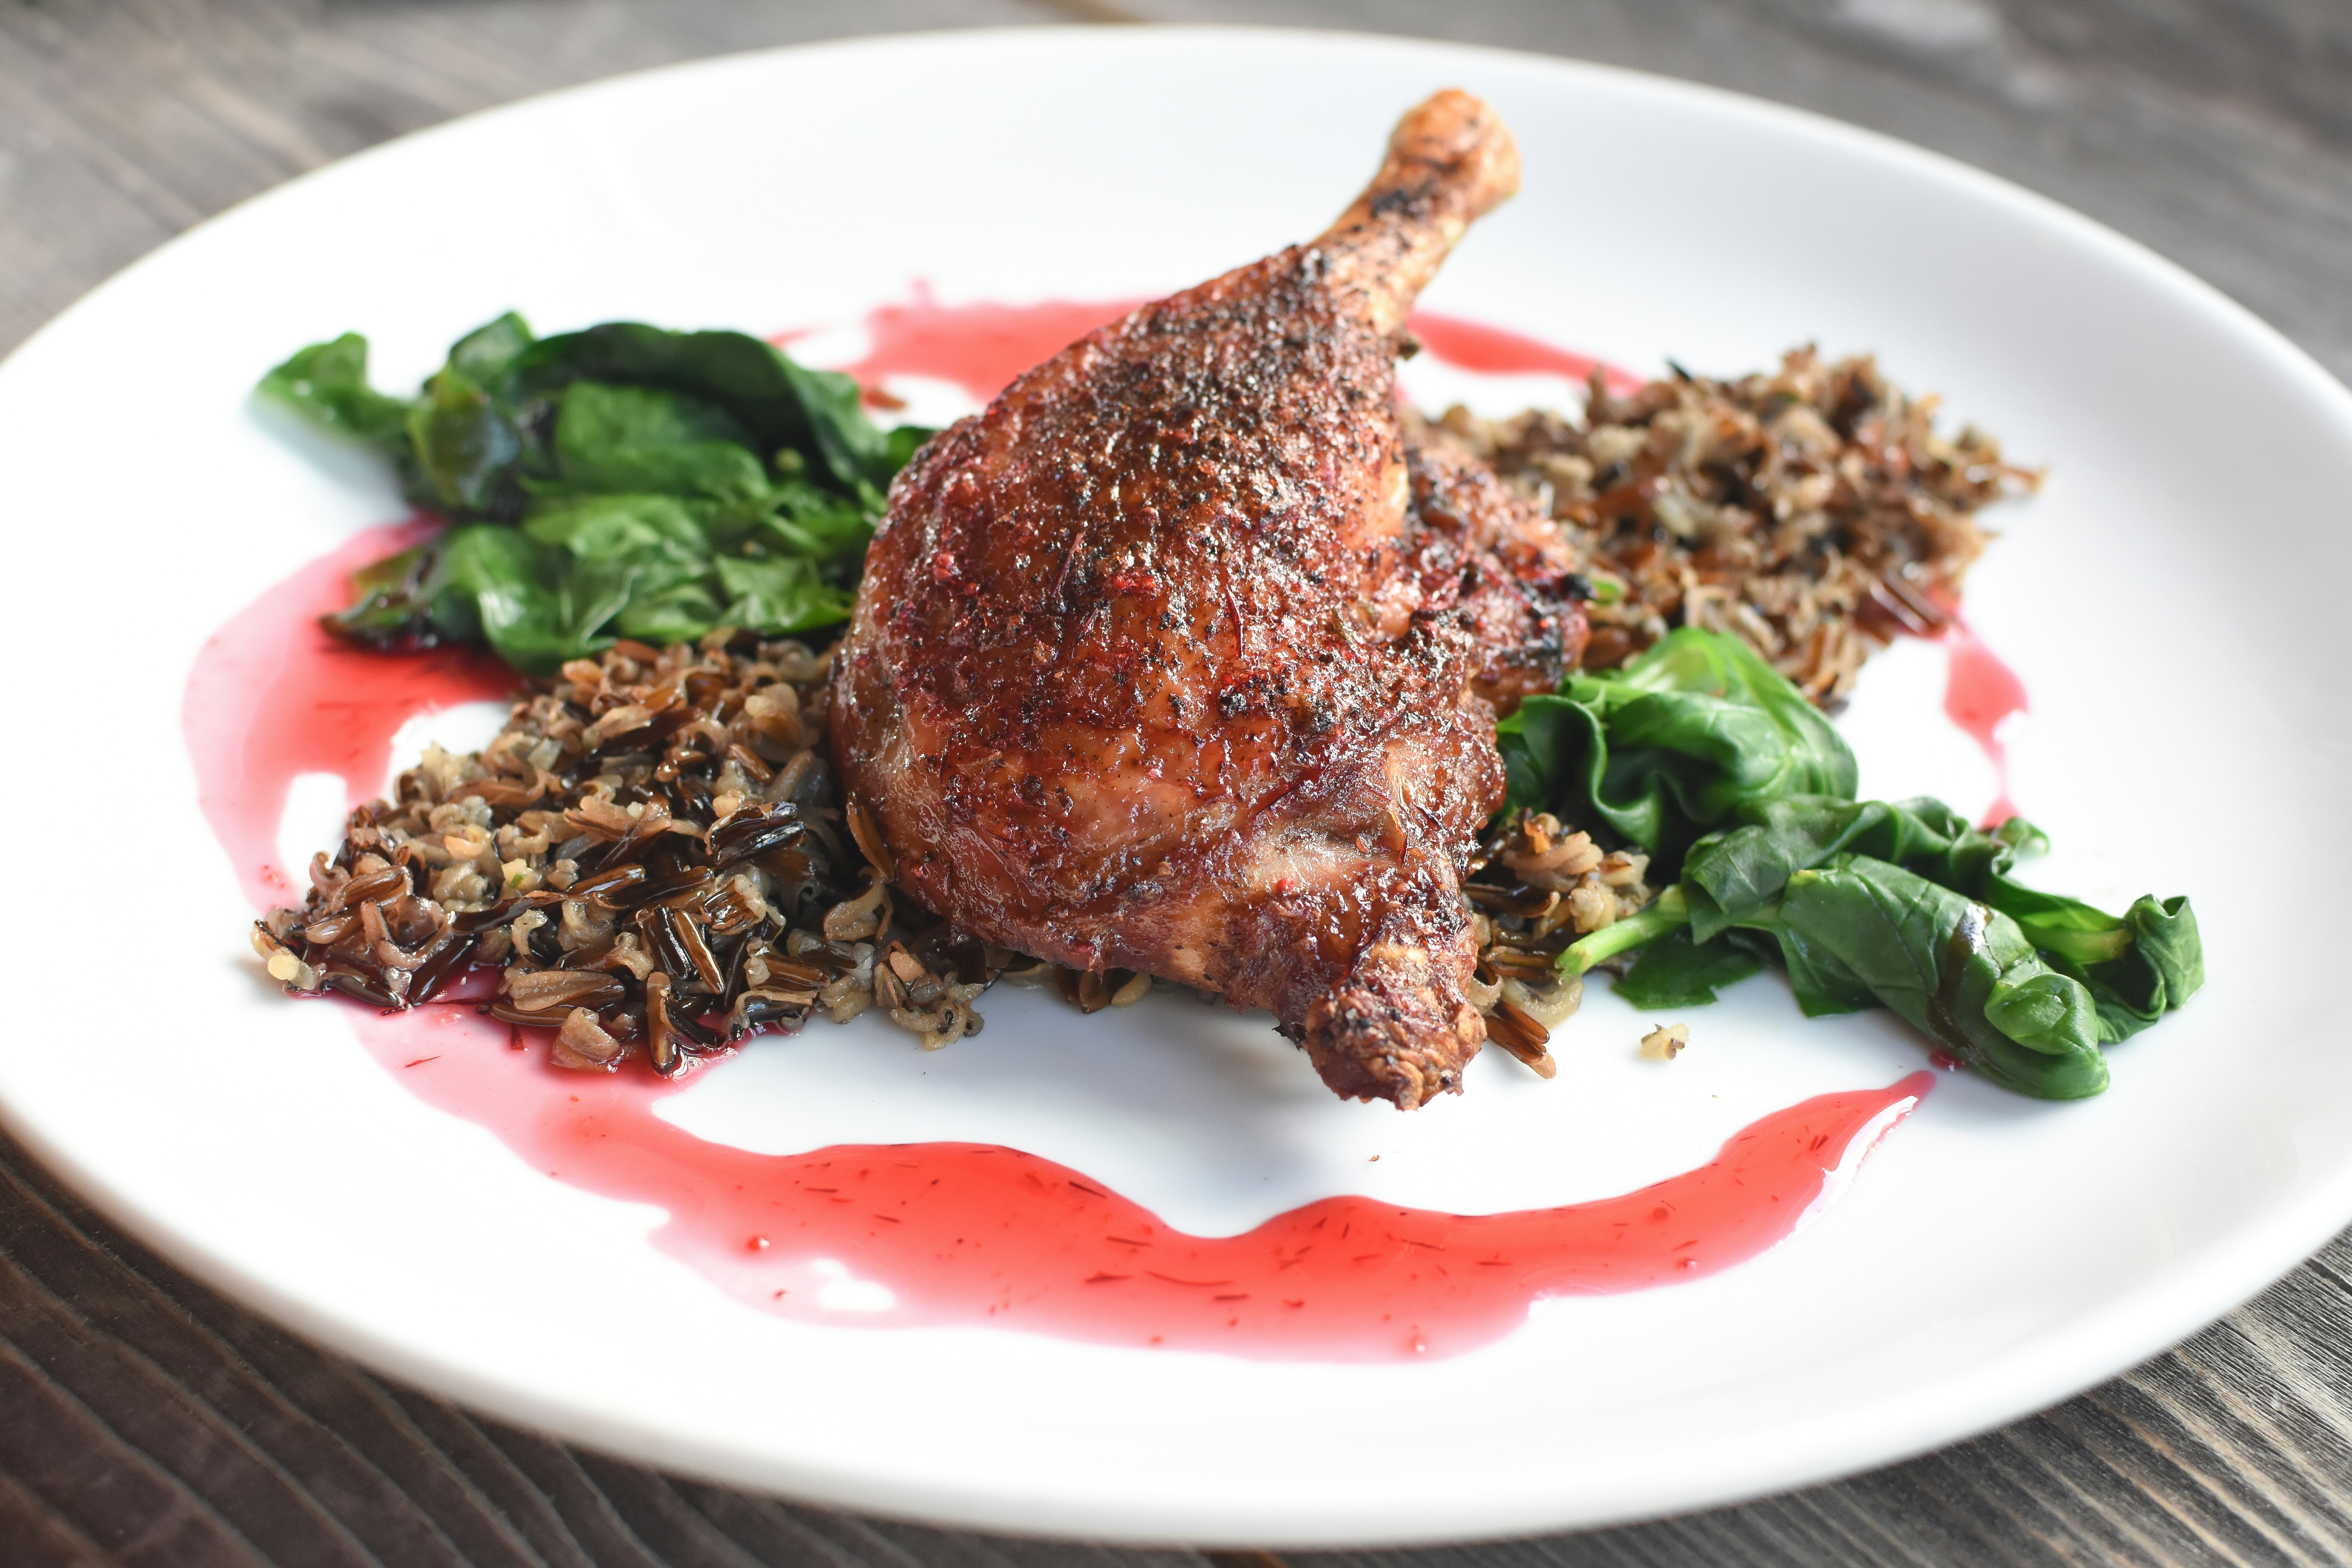 A piece of roasted duck lies on a bed of wild rice and greens on a white plate